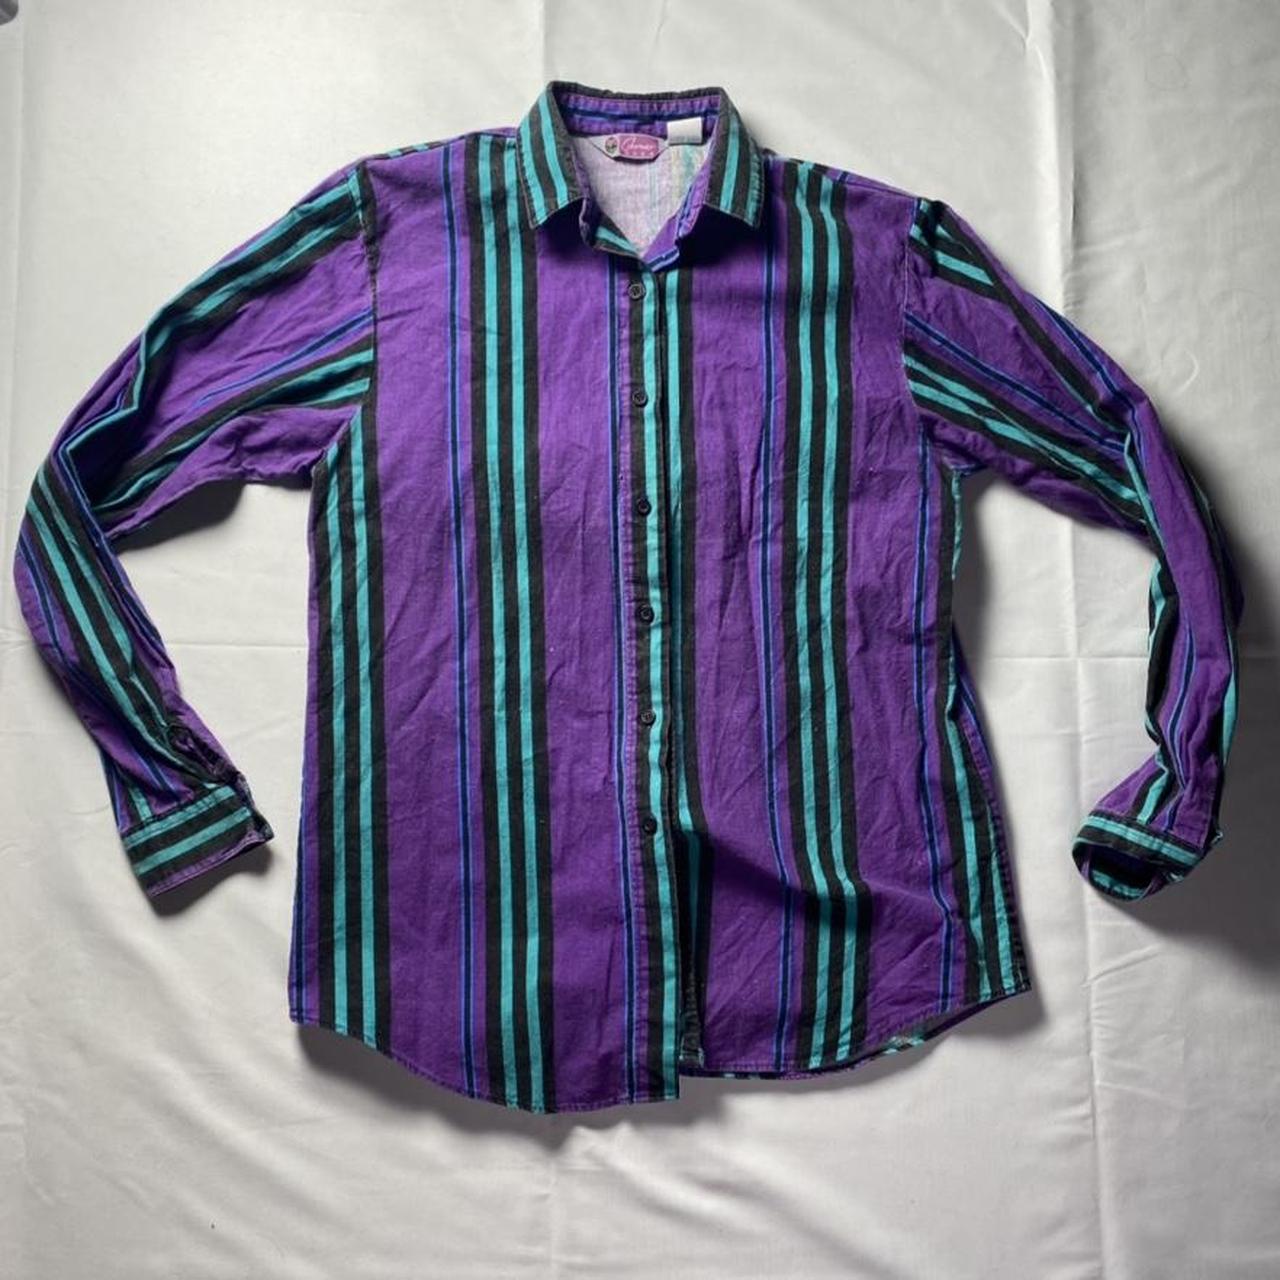 Product Image 2 - Purple and teal striped long